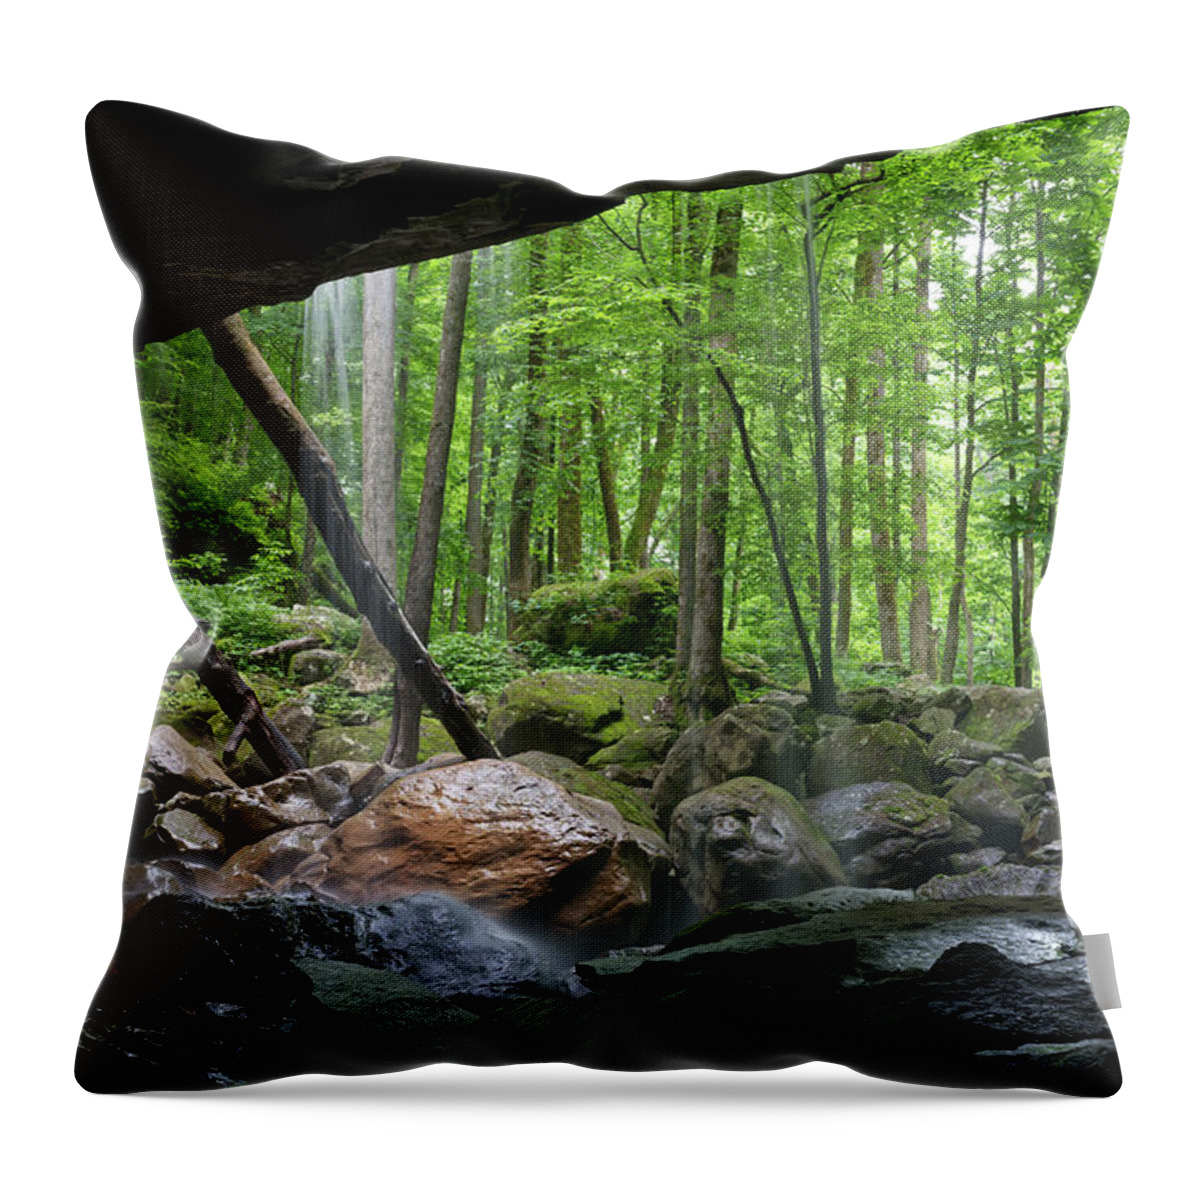 Big Laurel Falls Throw Pillow featuring the photograph Cave Behind Waterfall 2 by Phil Perkins